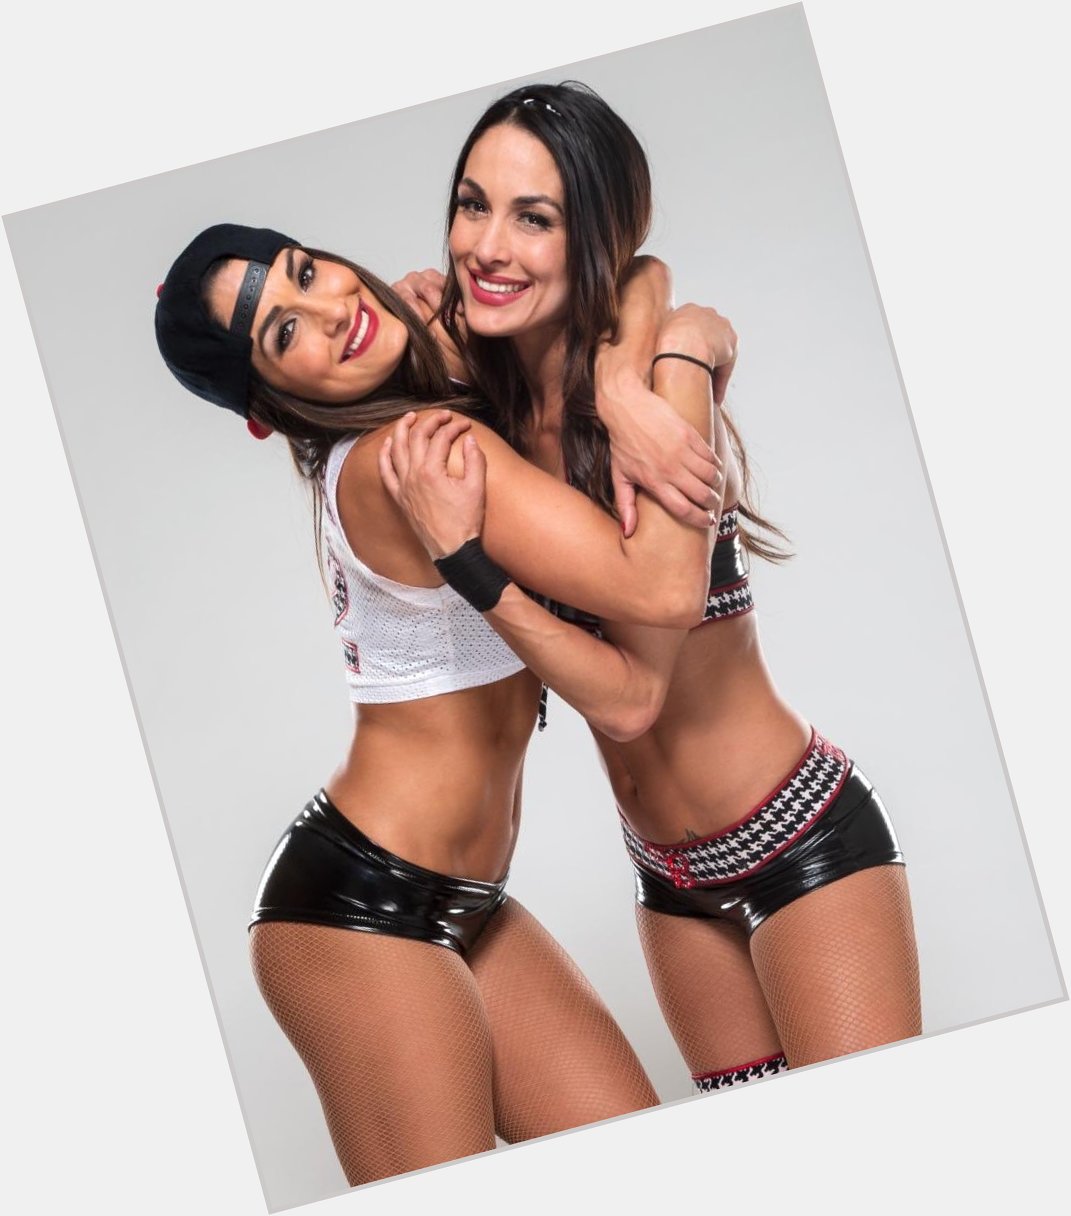 Happy birthday to the Bella Twins, they turn 37 today  What s your favorite match from The Bellas? 